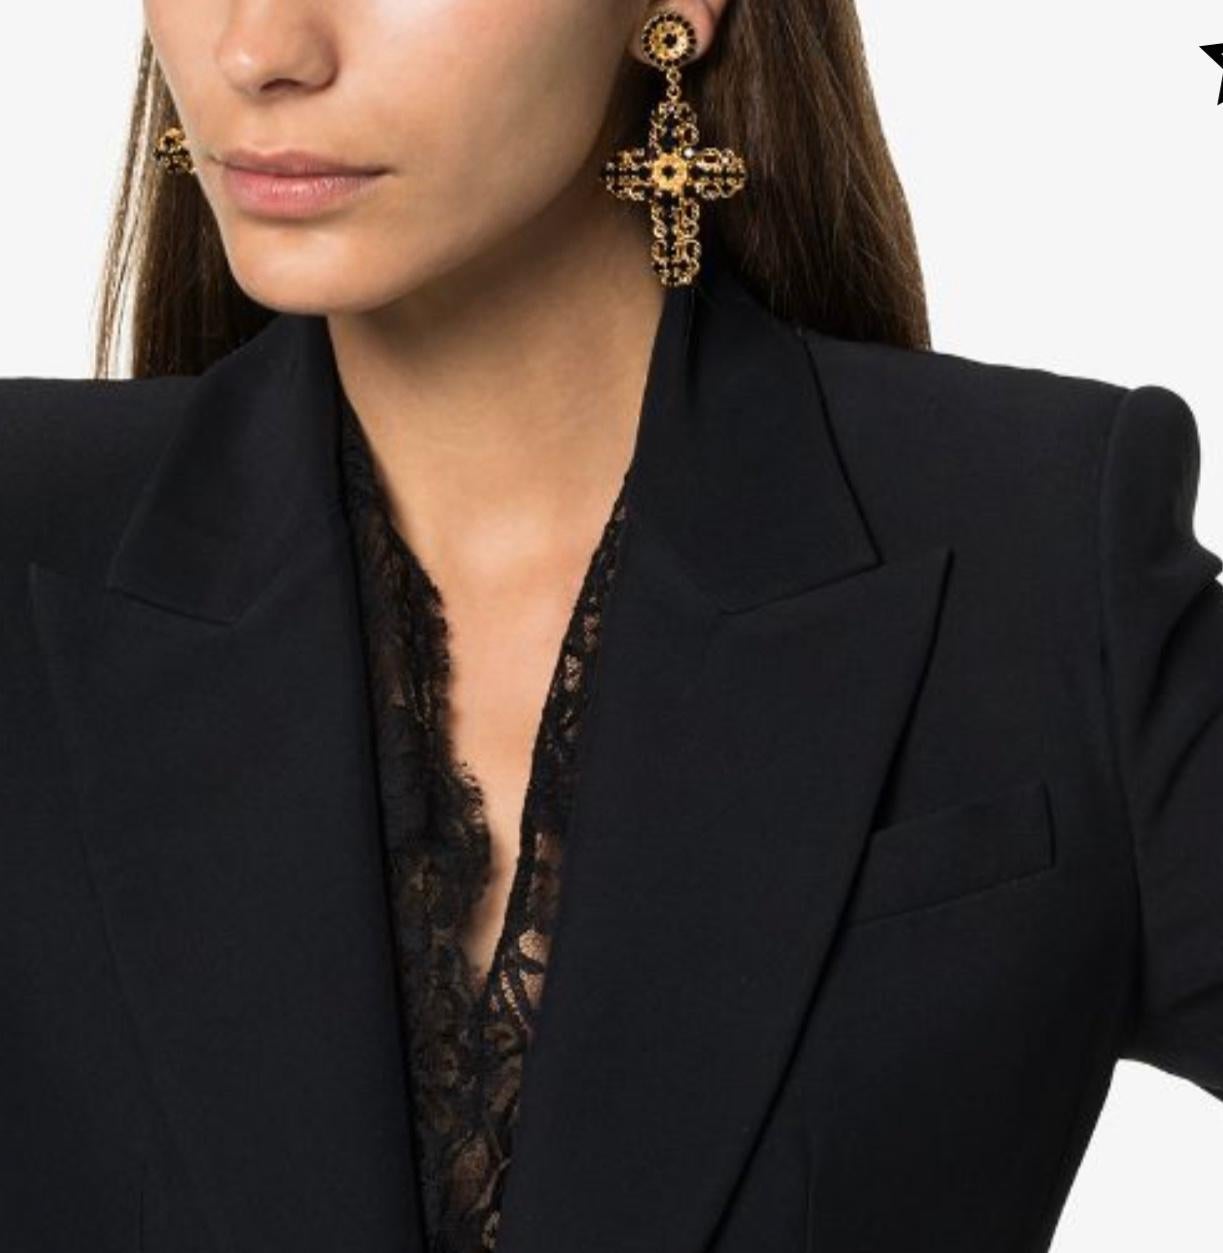  Stunning Brand New With Tags, 100% Genuine Dolce & Gabbana Gold Crystal Clip On Earrings. 
 
 
 
 
 Model: Clip on 
 Pattern: Cross, watermark 
 Material: 20% Glass, 80% Brass 
 
 Color: Gold with black crystals 
 
 Logo details 
 Made in Italy 
 
